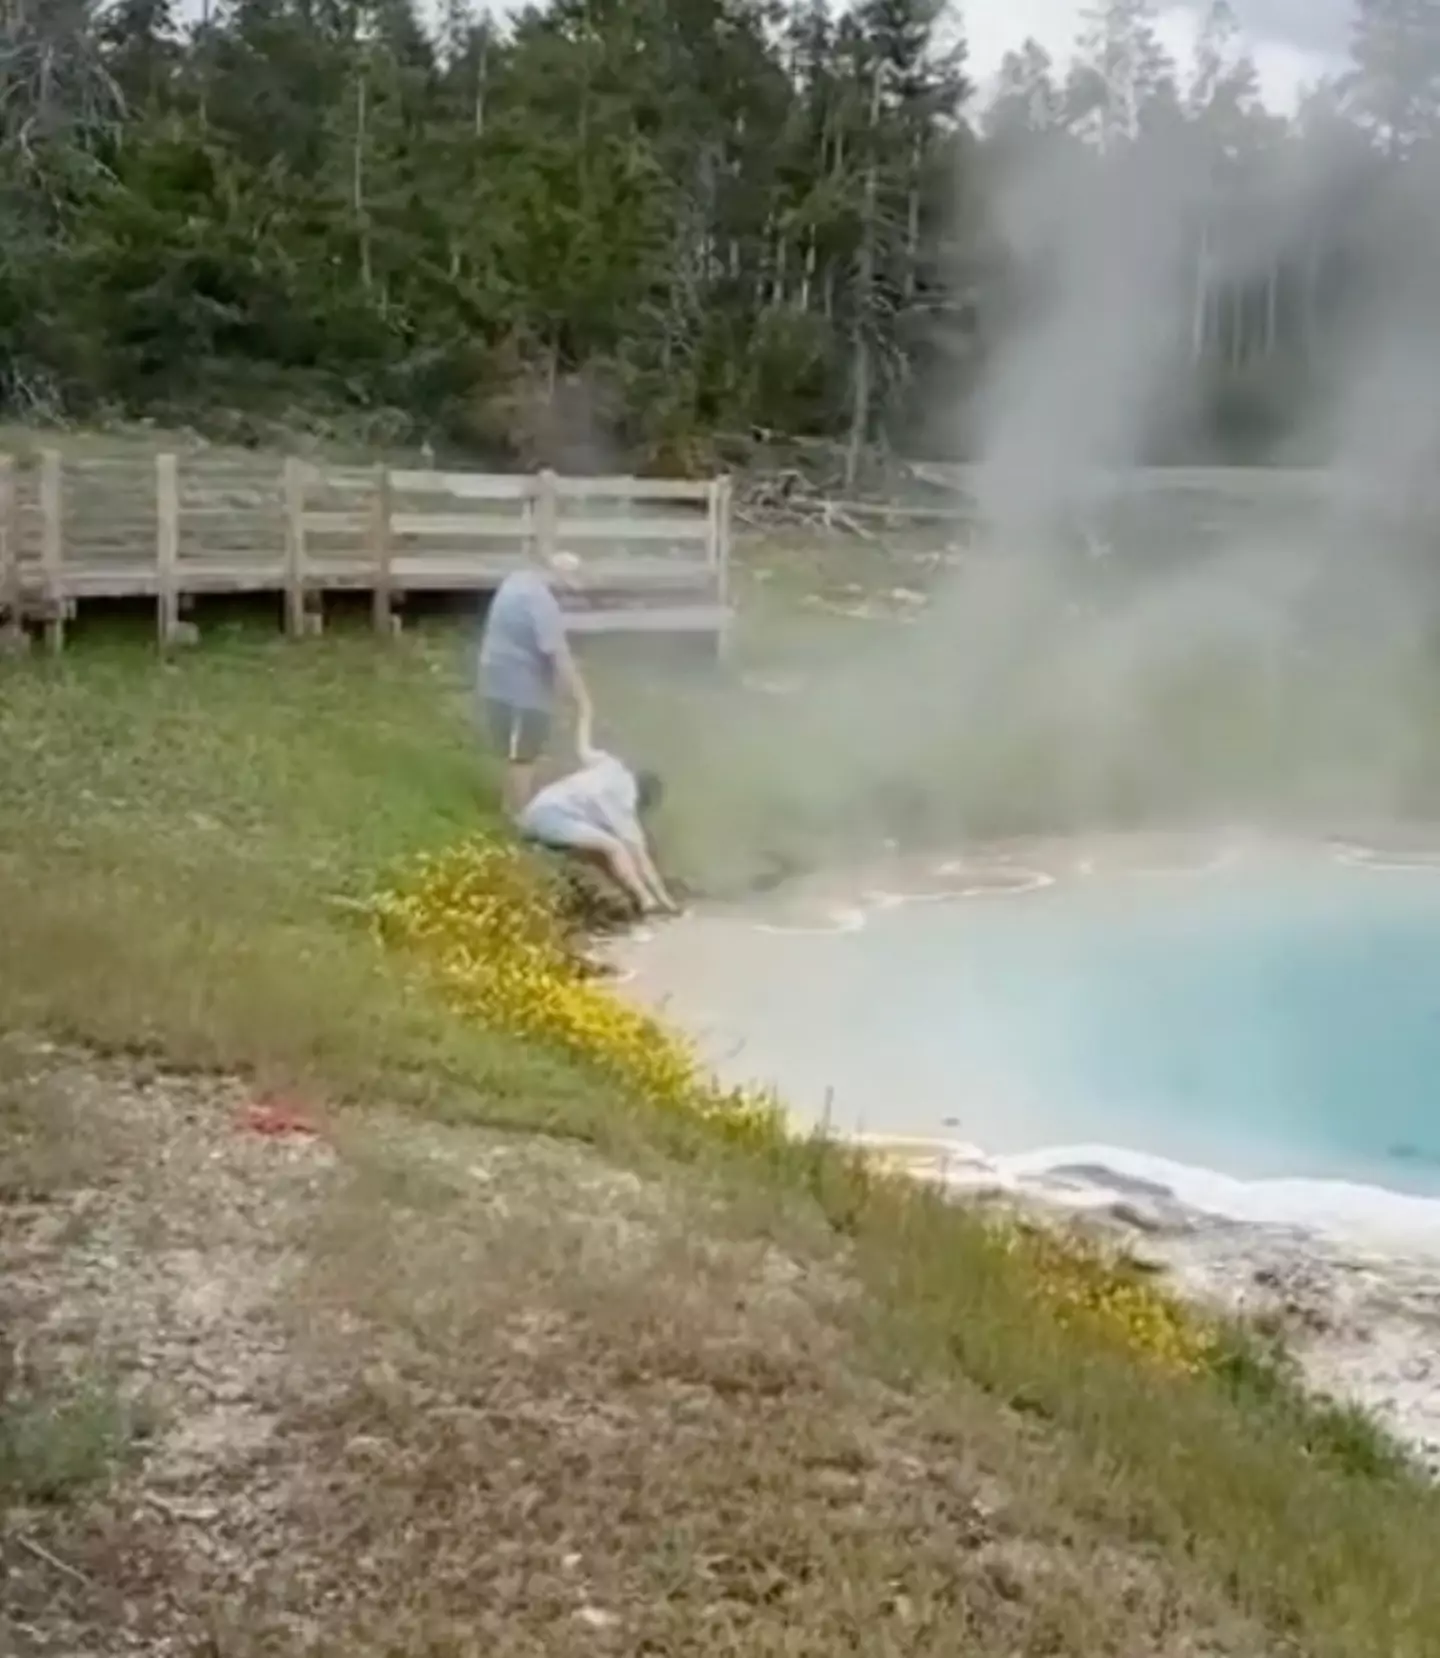 A woman was sen dipping her hand into a hot spring at Yellowstone National Park.